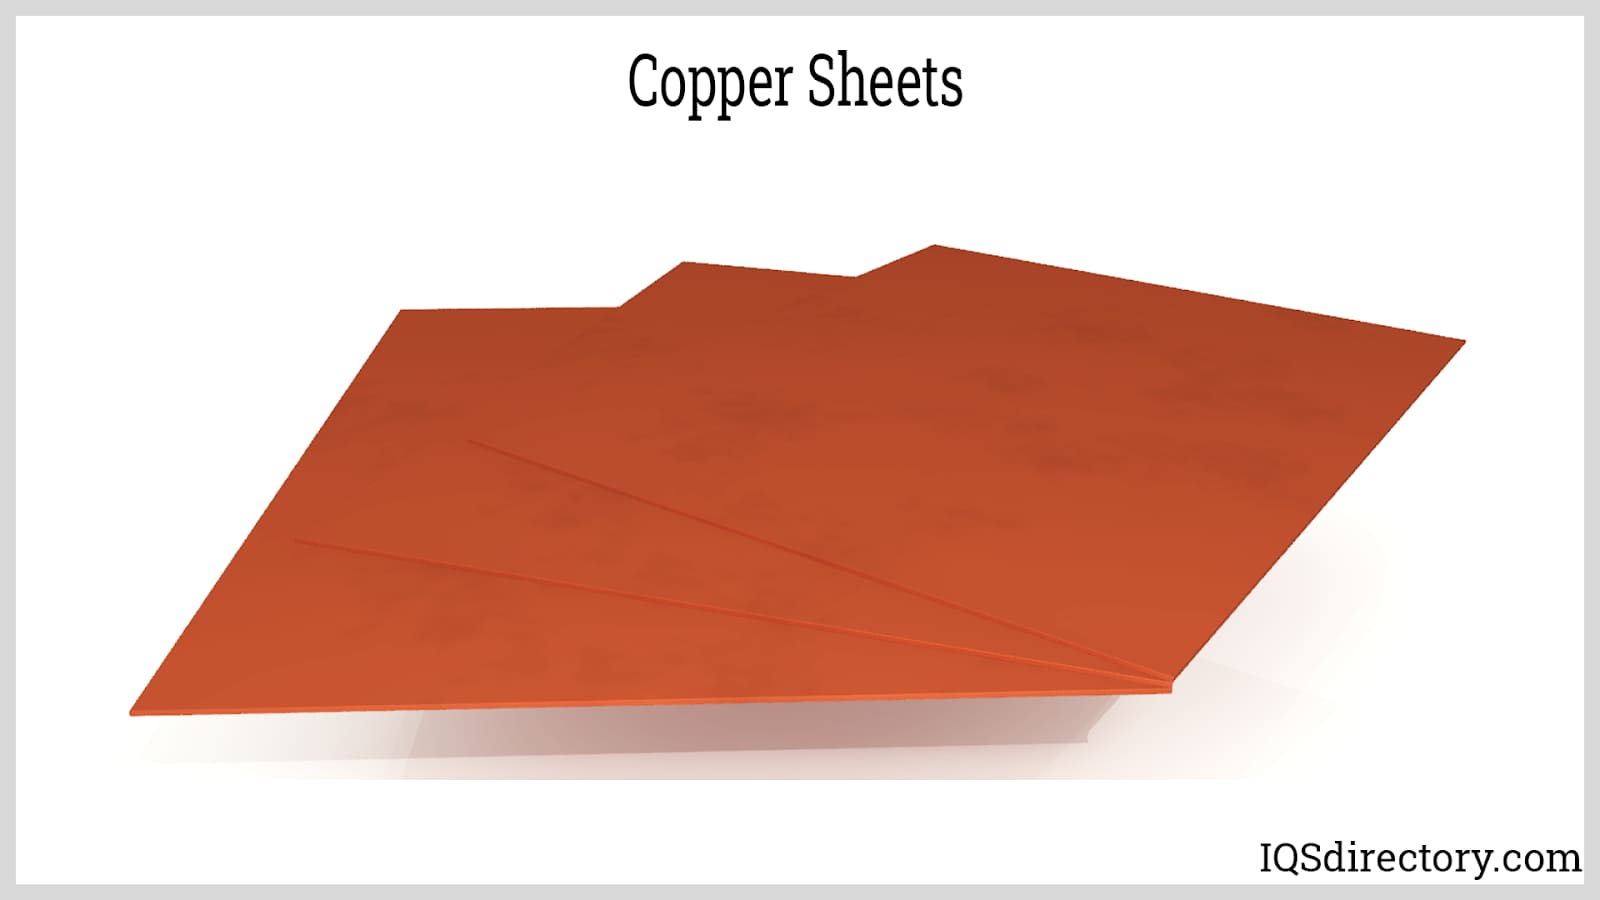 Beryllium Copper: What Is It? How Is It Used? Types Of